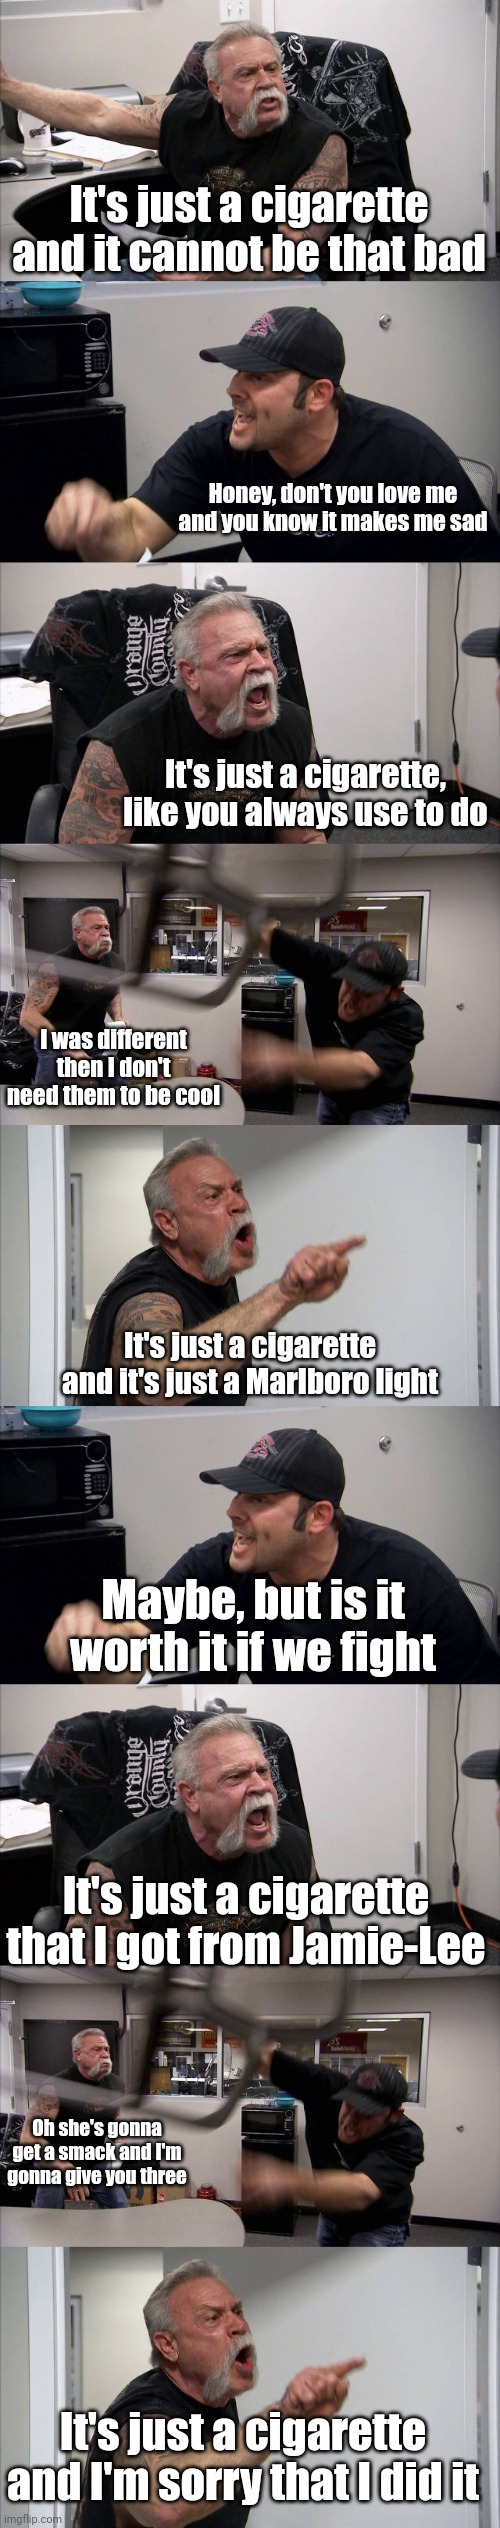 Meme #2,123 | It's just a cigarette and it cannot be that bad; Honey, don't you love me and you know it makes me sad; It's just a cigarette, like you always use to do; I was different then I don't need them to be cool; It's just a cigarette and it's just a Marlboro light; Maybe, but is it worth it if we fight; It's just a cigarette that I got from Jamie-Lee; Oh she's gonna get a smack and I'm gonna give you three; It's just a cigarette and I'm sorry that I did it | image tagged in memes,american chopper argument,cigarette,duet,the cigarette duet,youtube | made w/ Imgflip meme maker